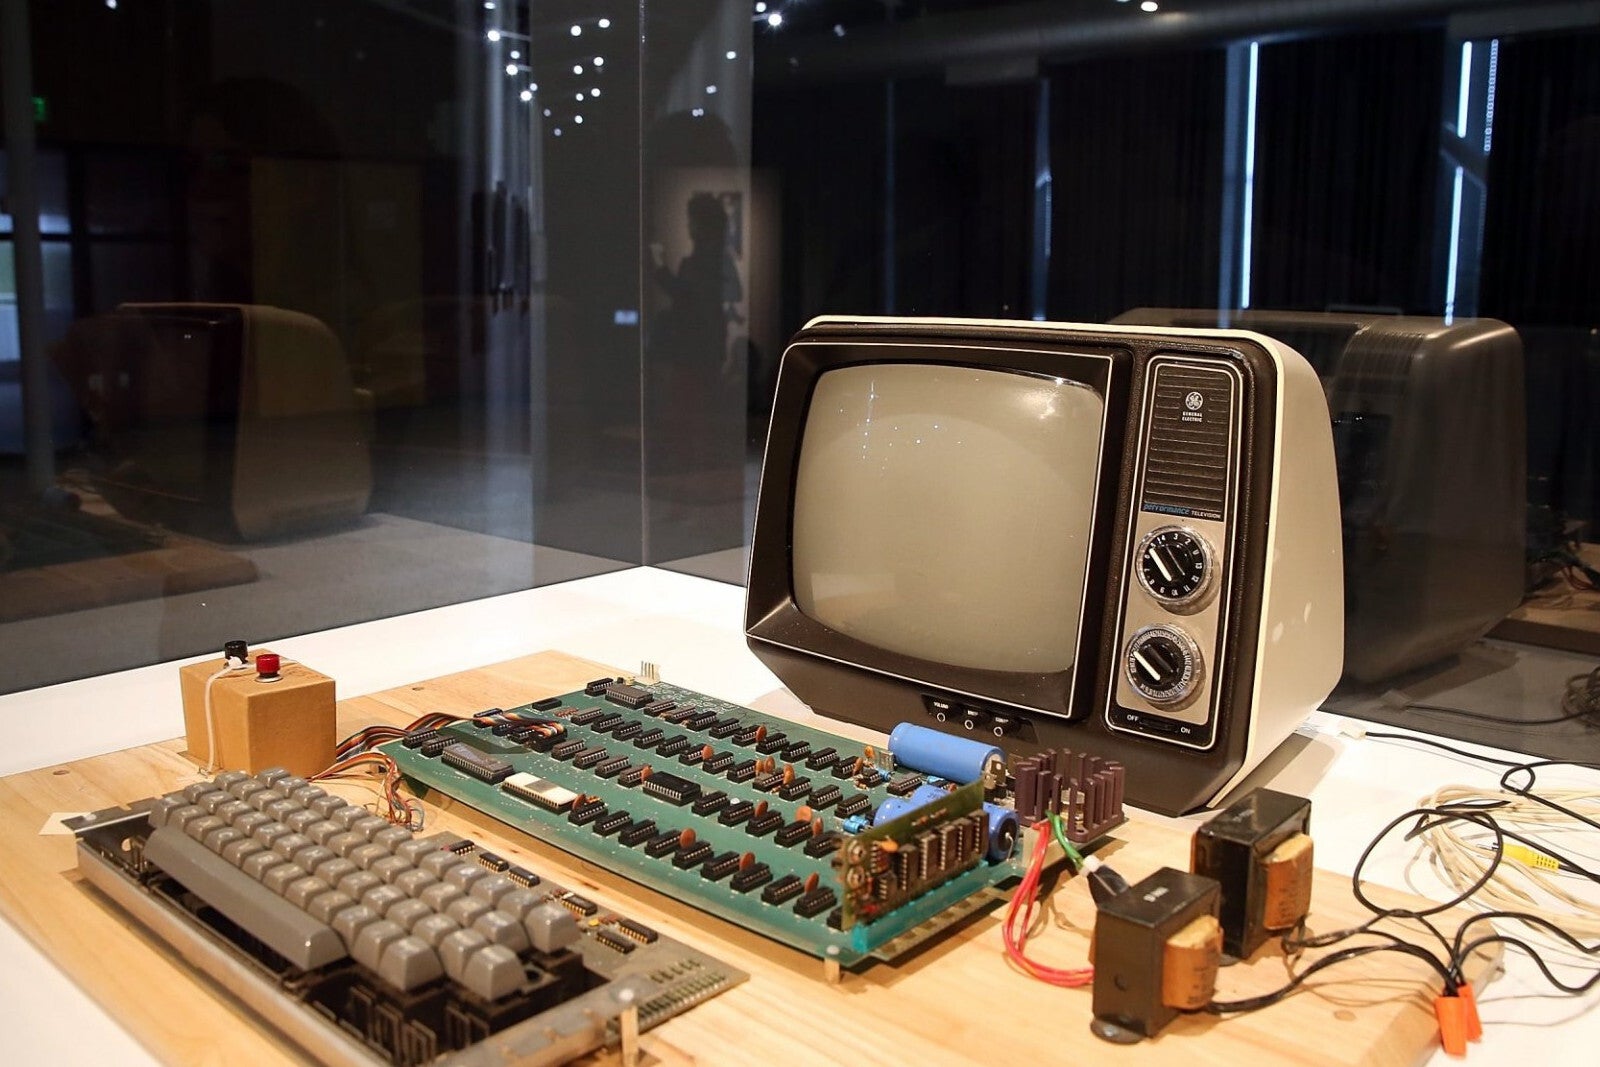 The first Apple computer, product of Wozniak's ingenuity and the offerings of open-source technology - Apple co-founder Steve Wozniak releases video in support of right-to-repair